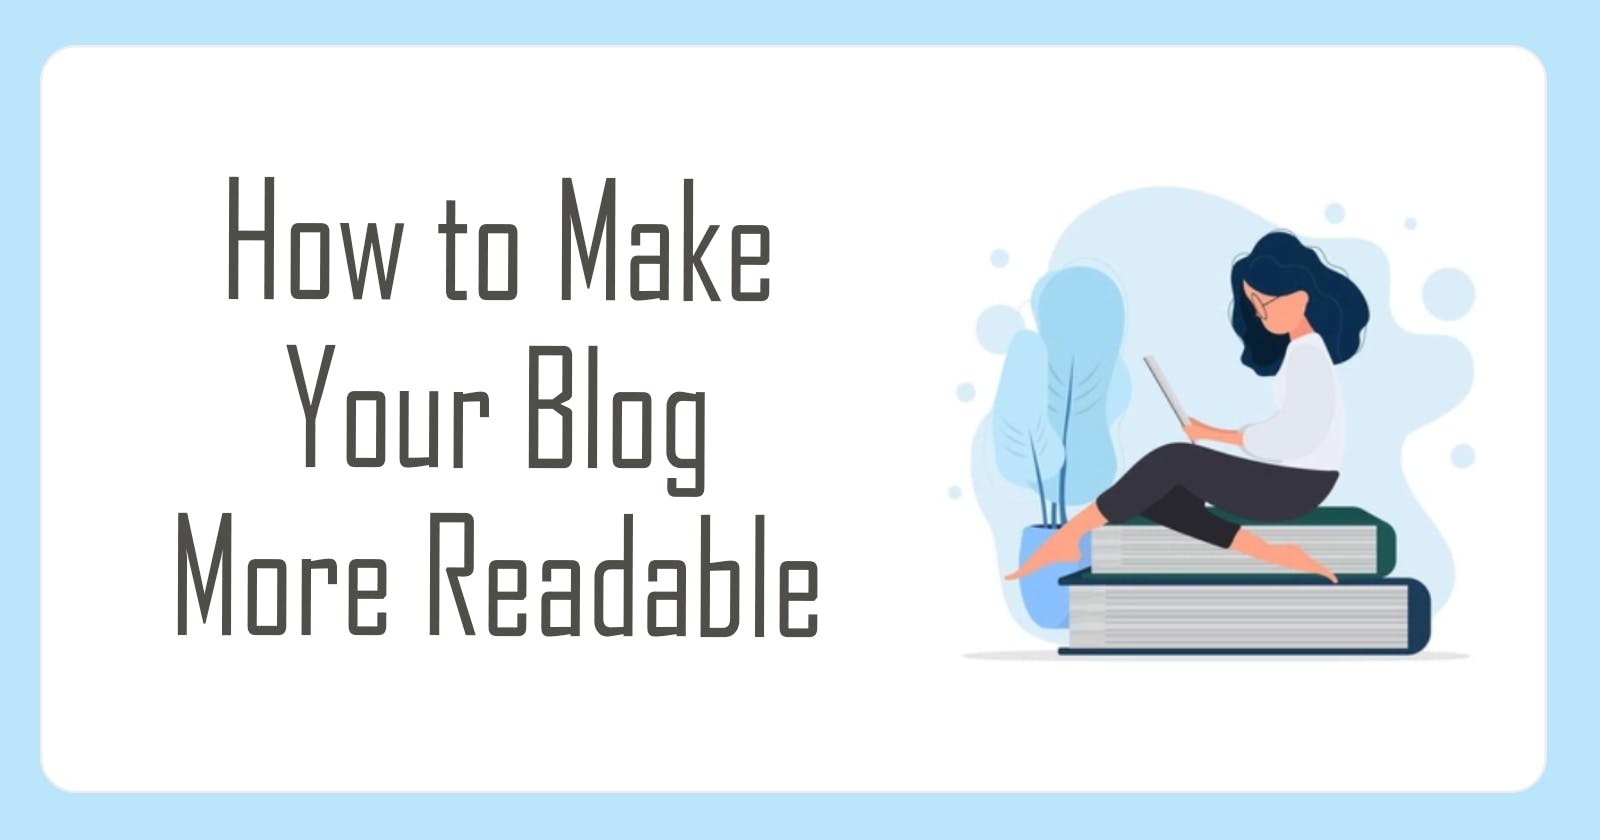 3 Simple Ways to Make Your Blog More Readable